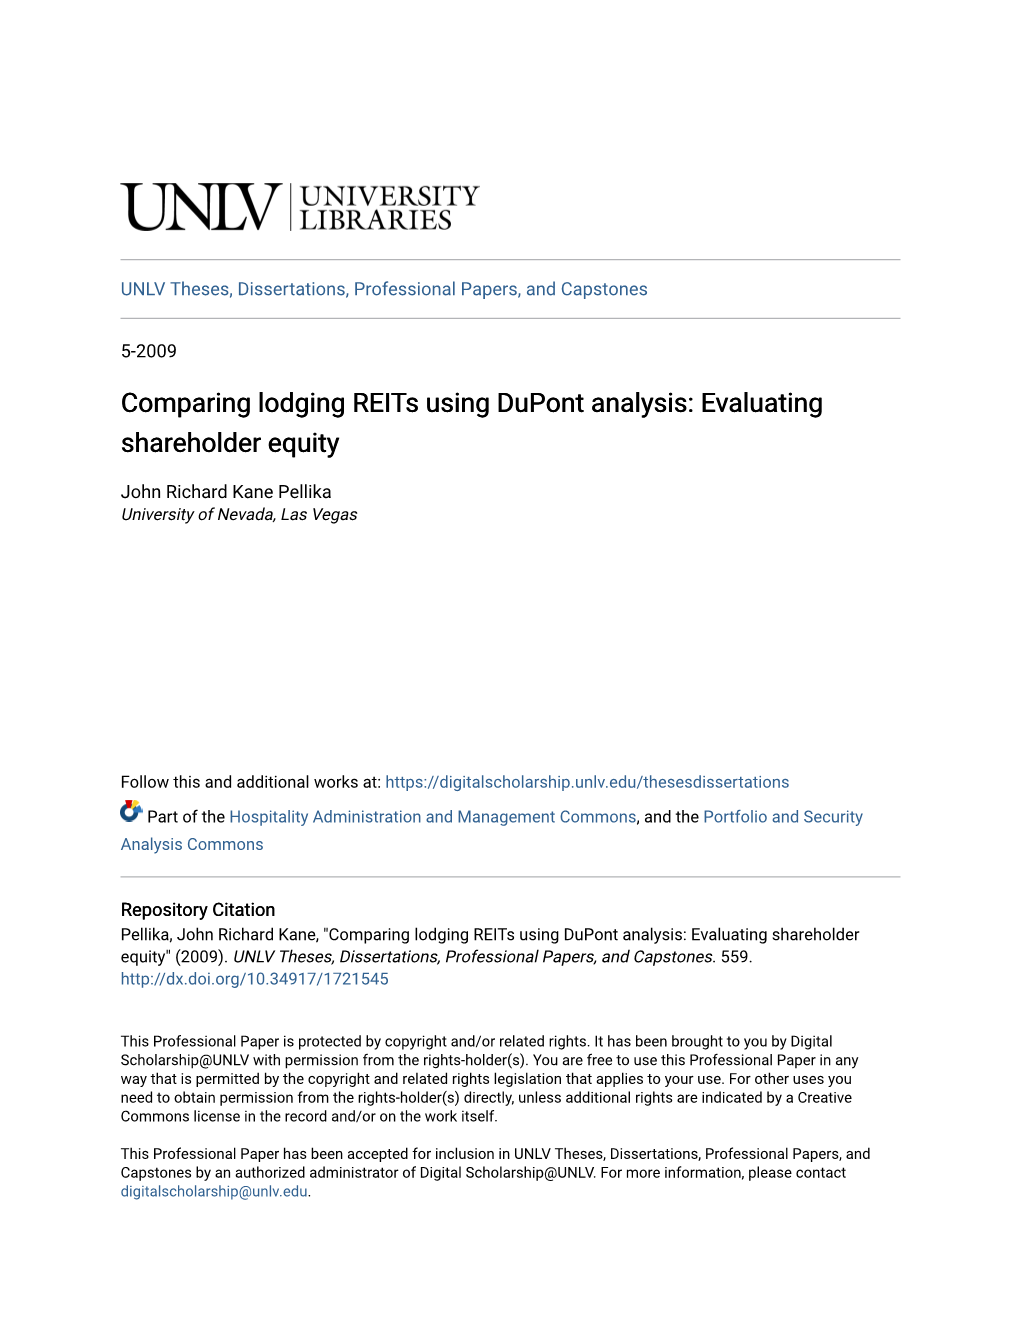 Comparing Lodging Reits Using Dupont Analysis: Evaluating Shareholder Equity